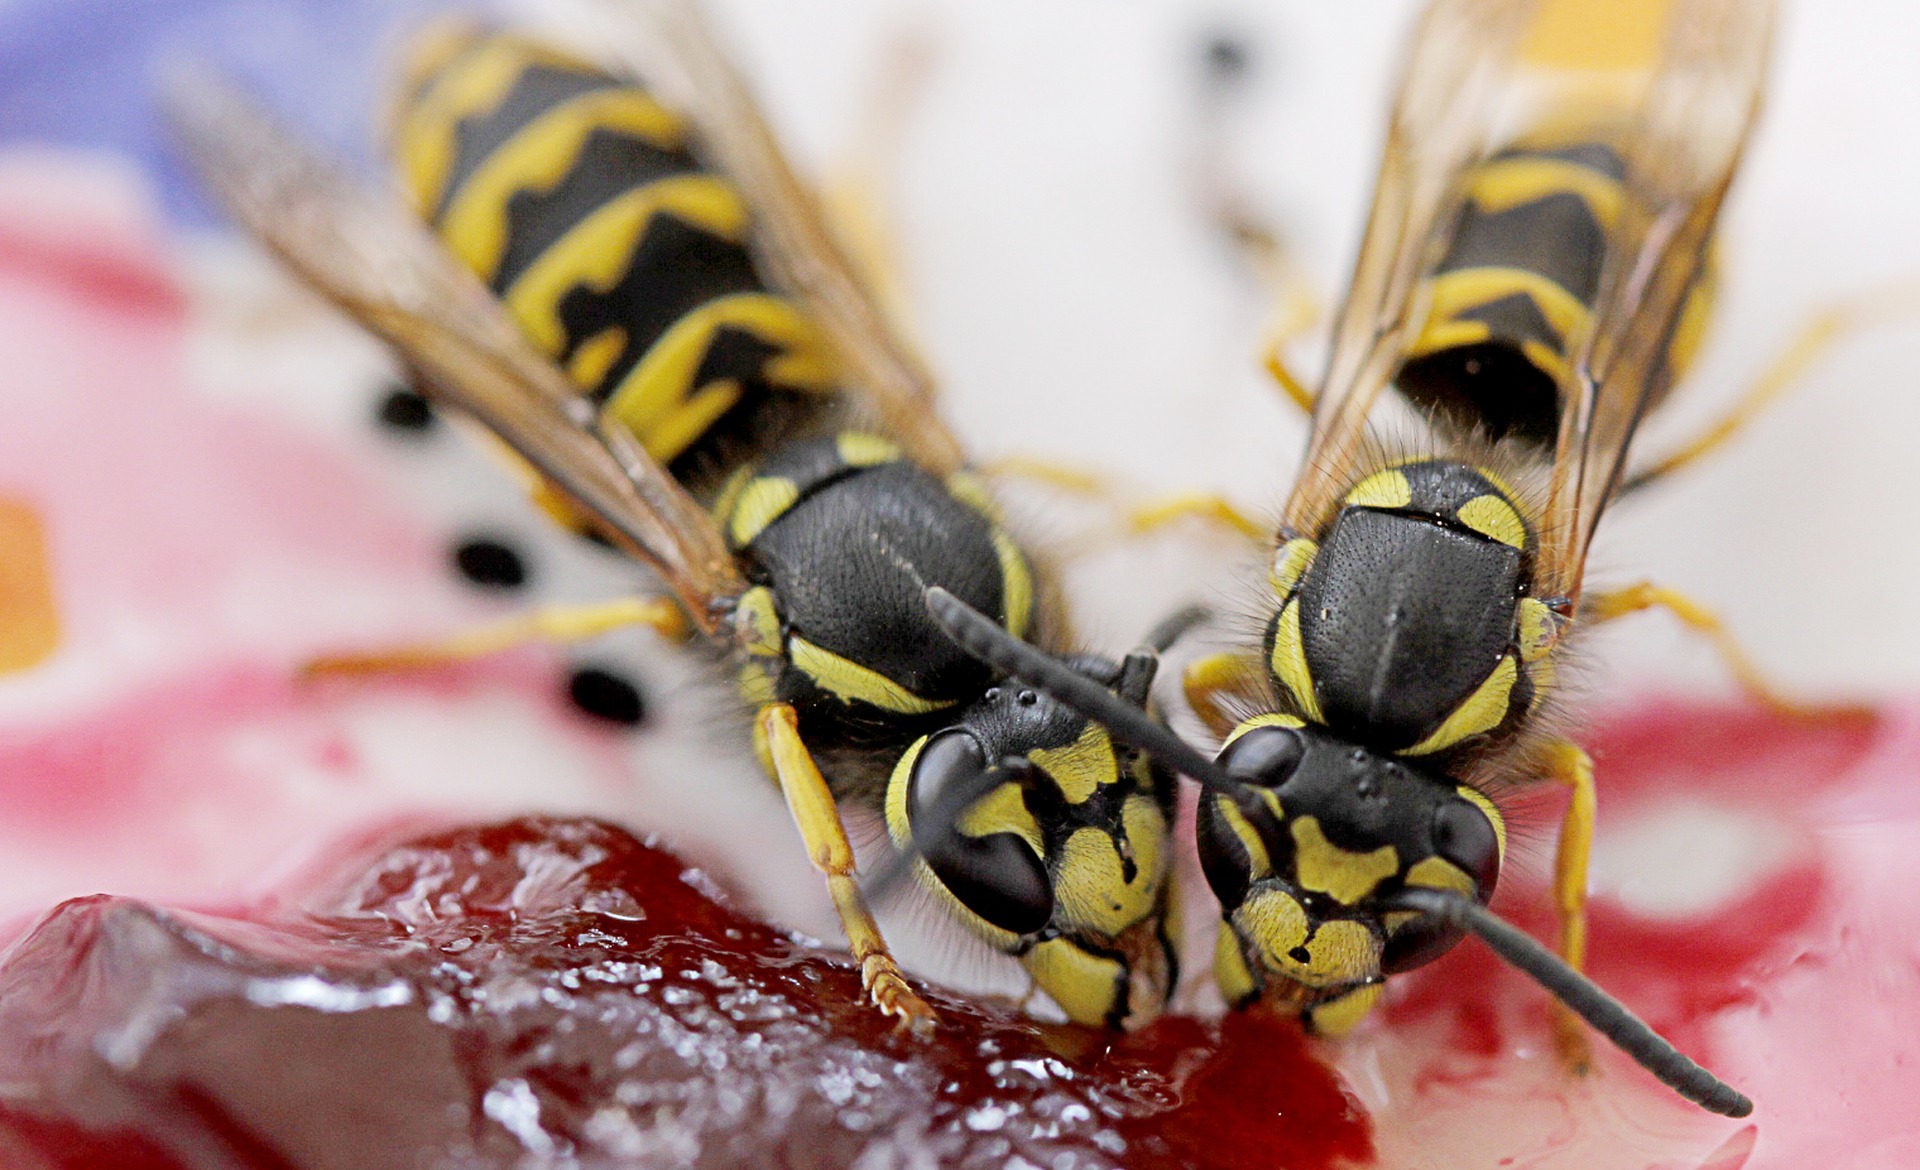 two wasps eating jam